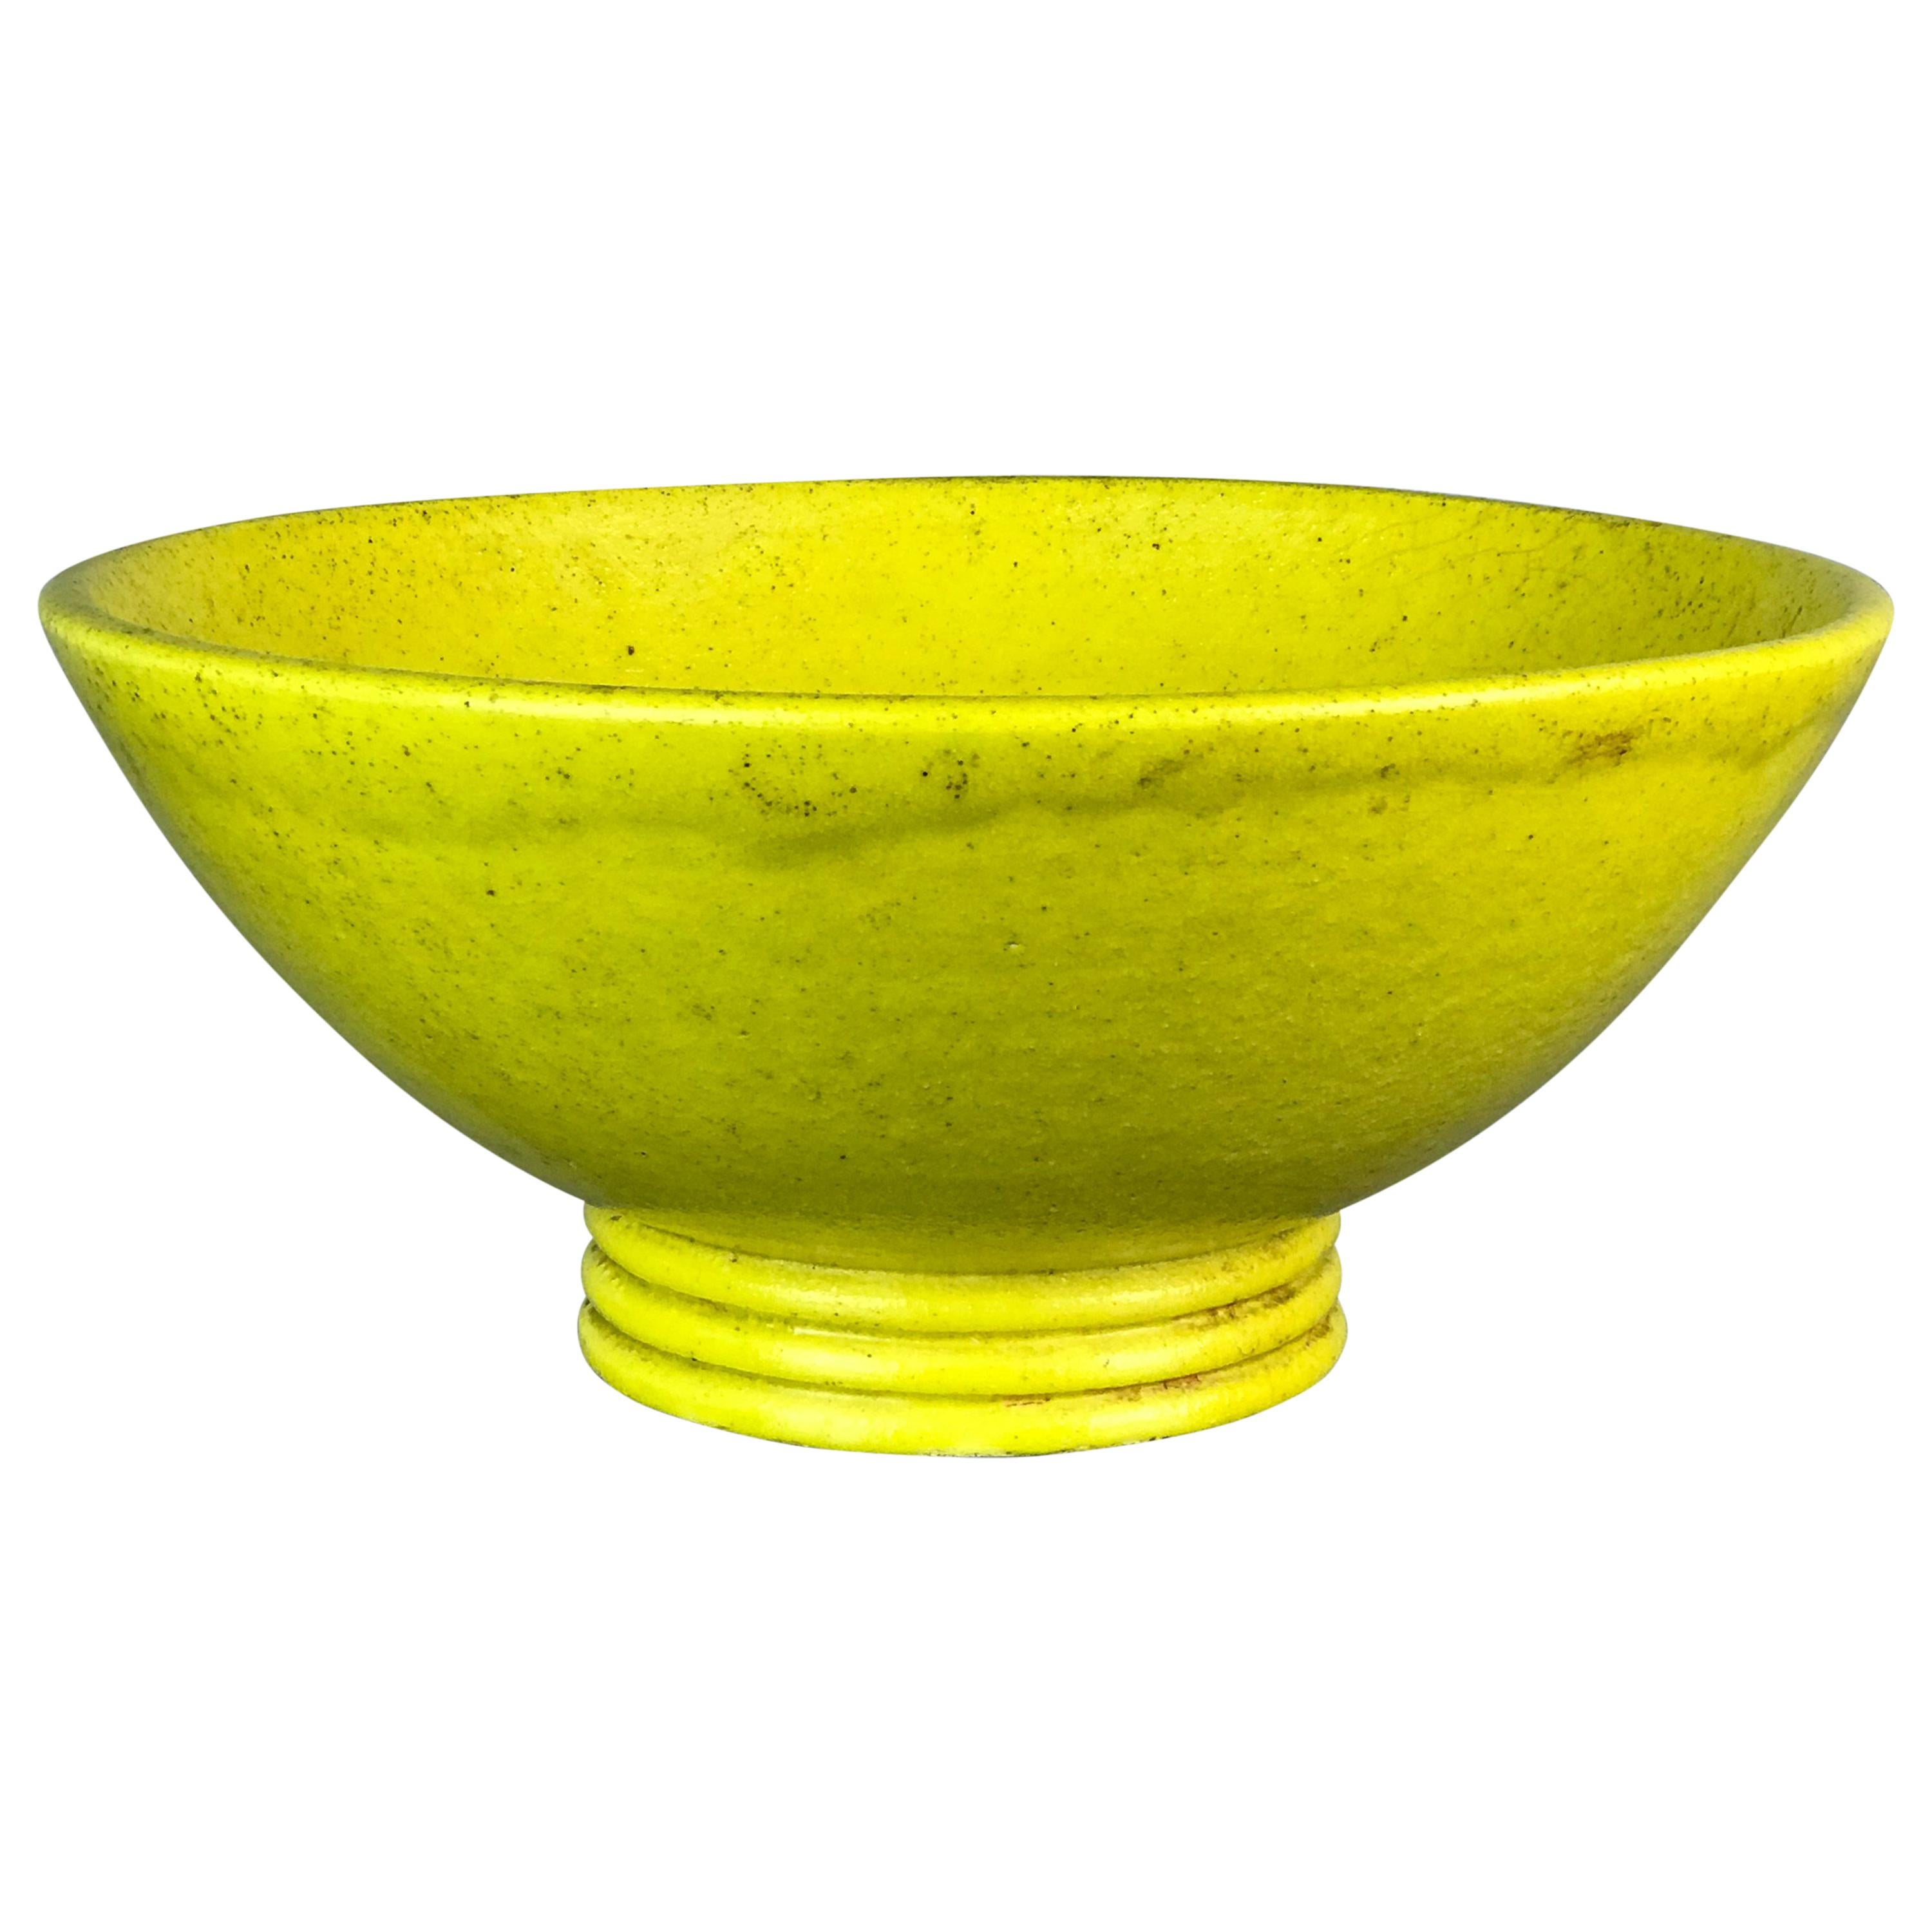 Large Stoneware Coupe Bowl in Yellow Glaze by French Potter Edmond Lachenal